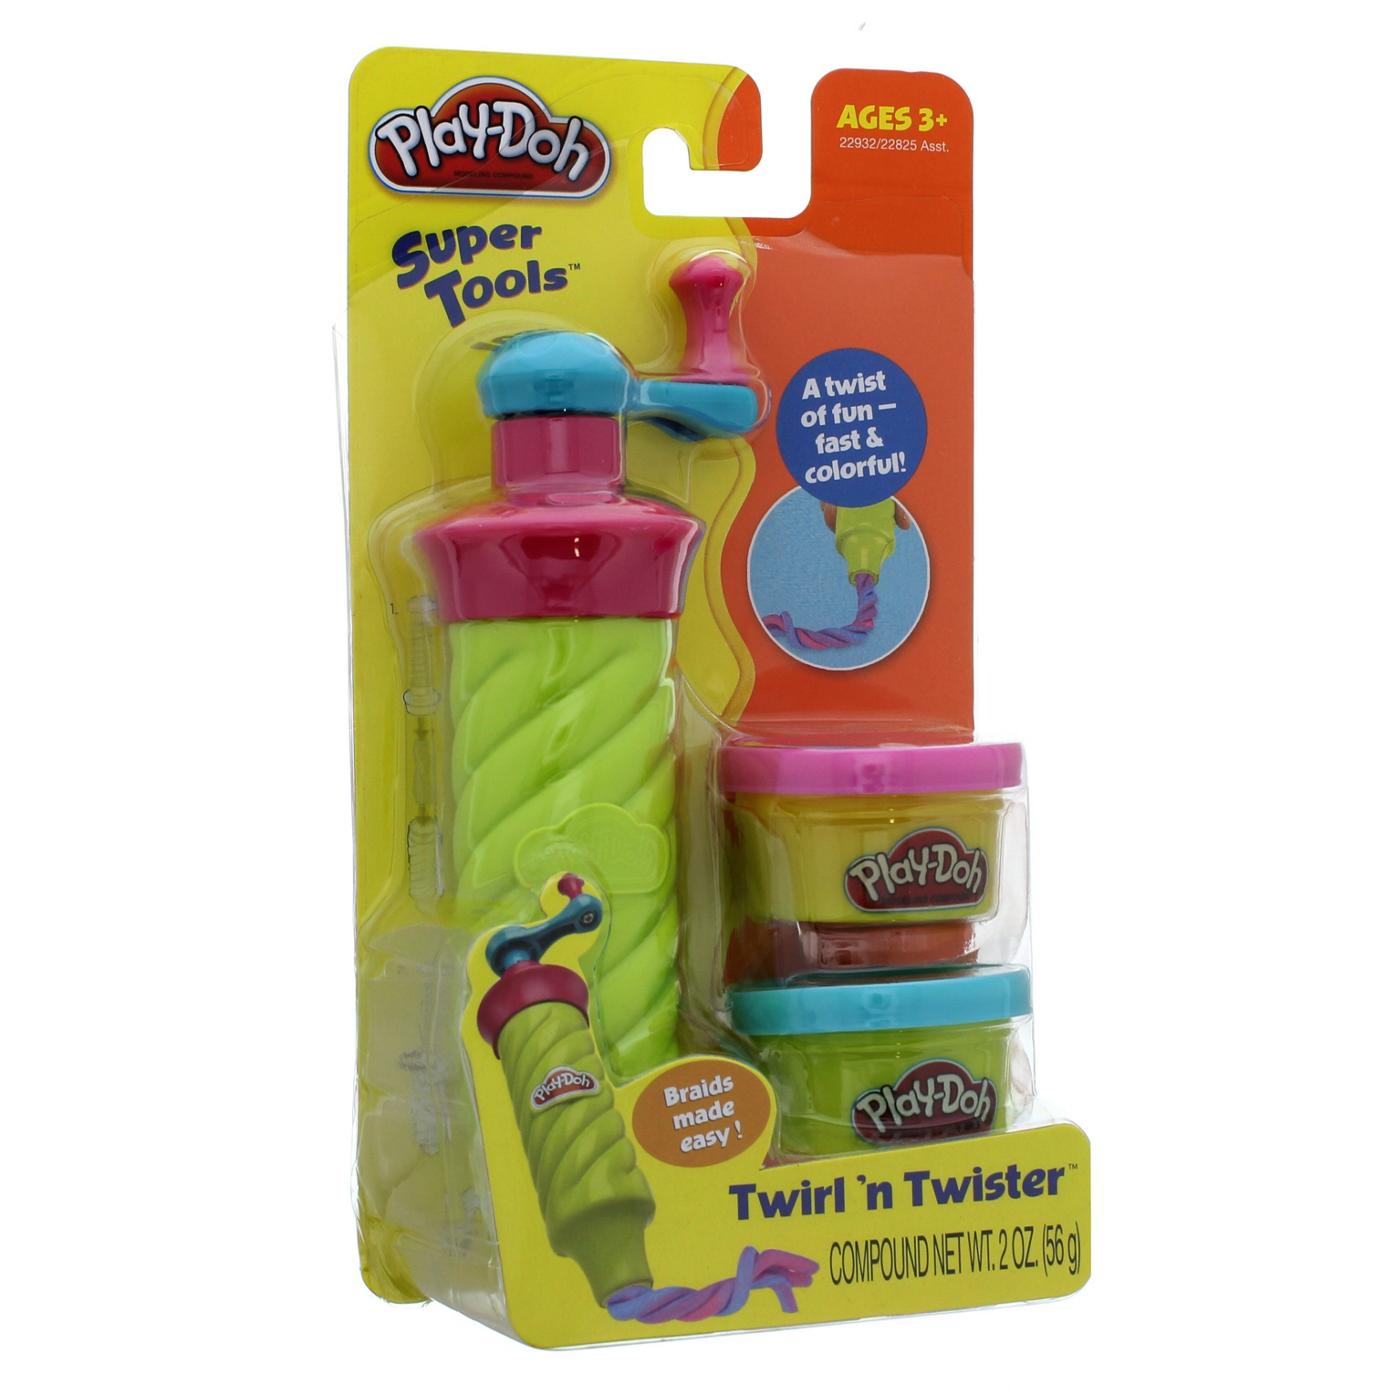 Play-Doh Super Tools from Hasbro 